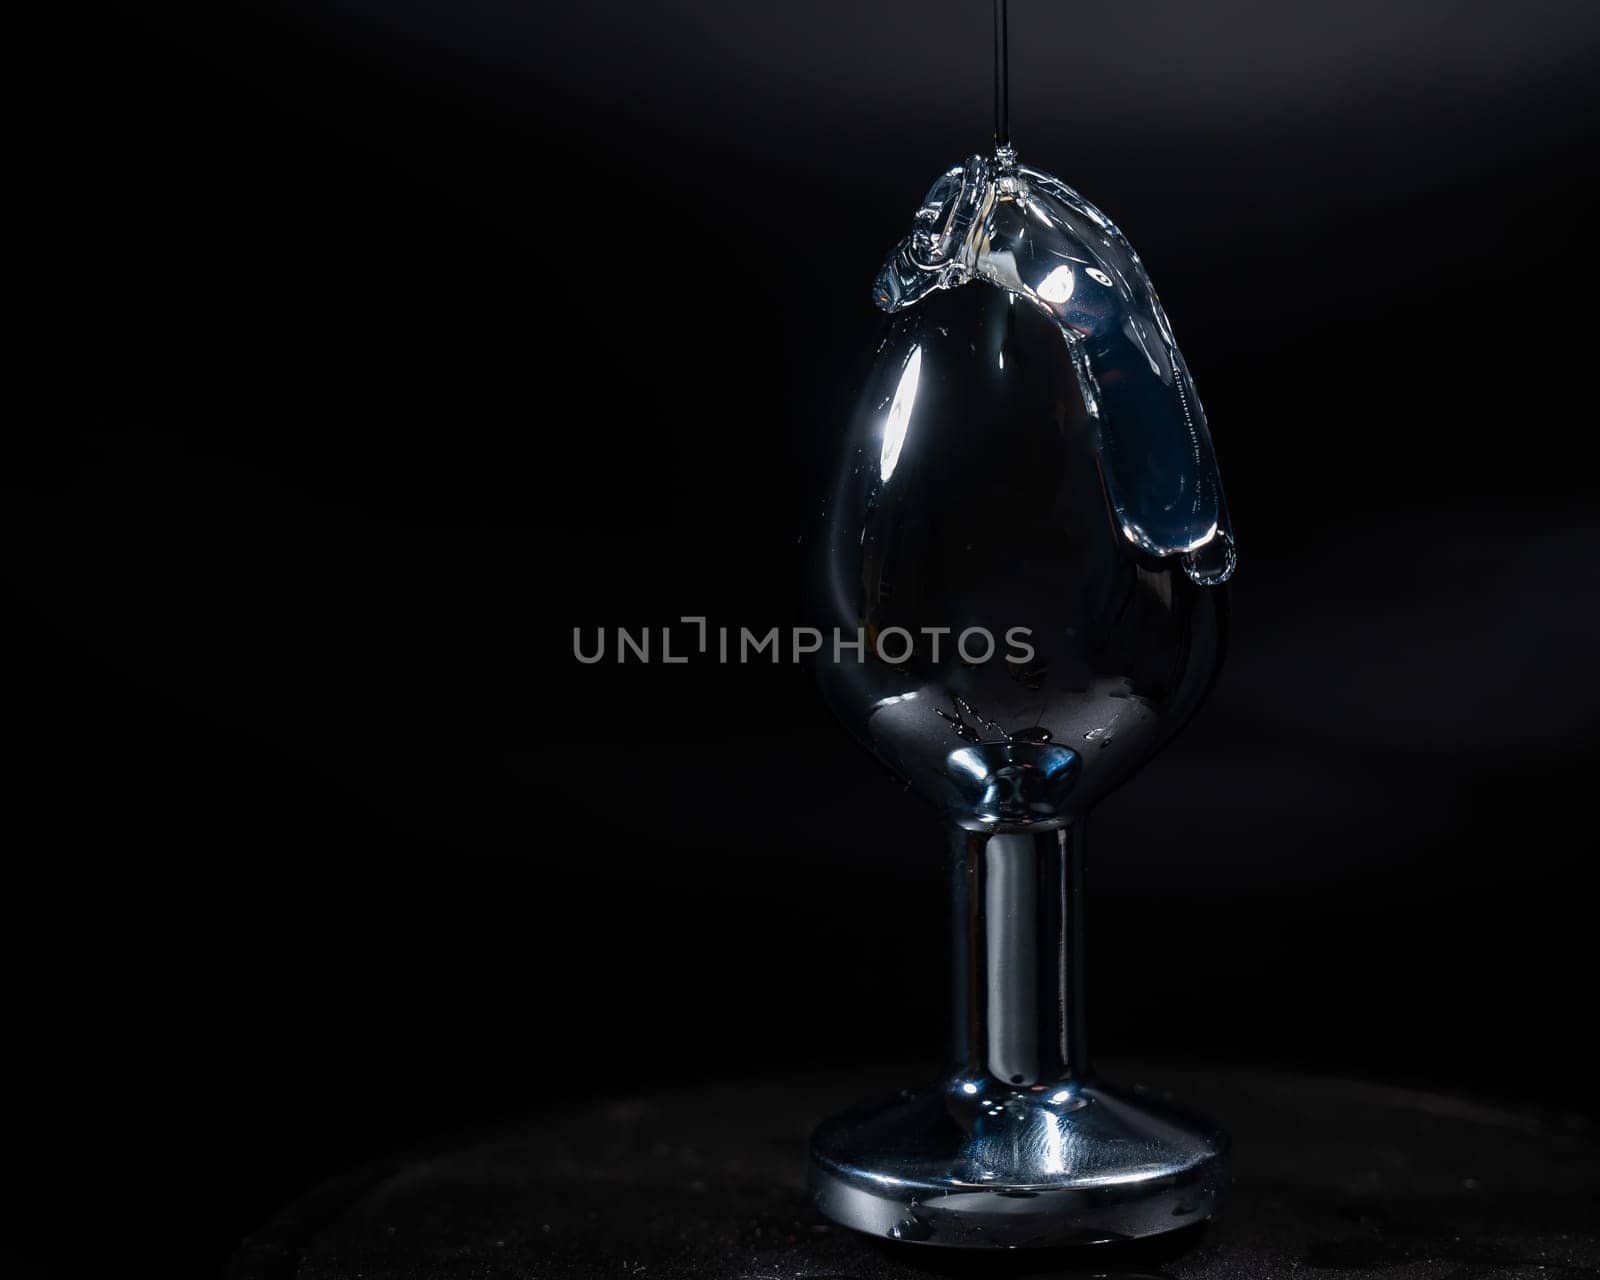 Intimate lubricant is poured onto a steel anal plug on a black background. by mrwed54